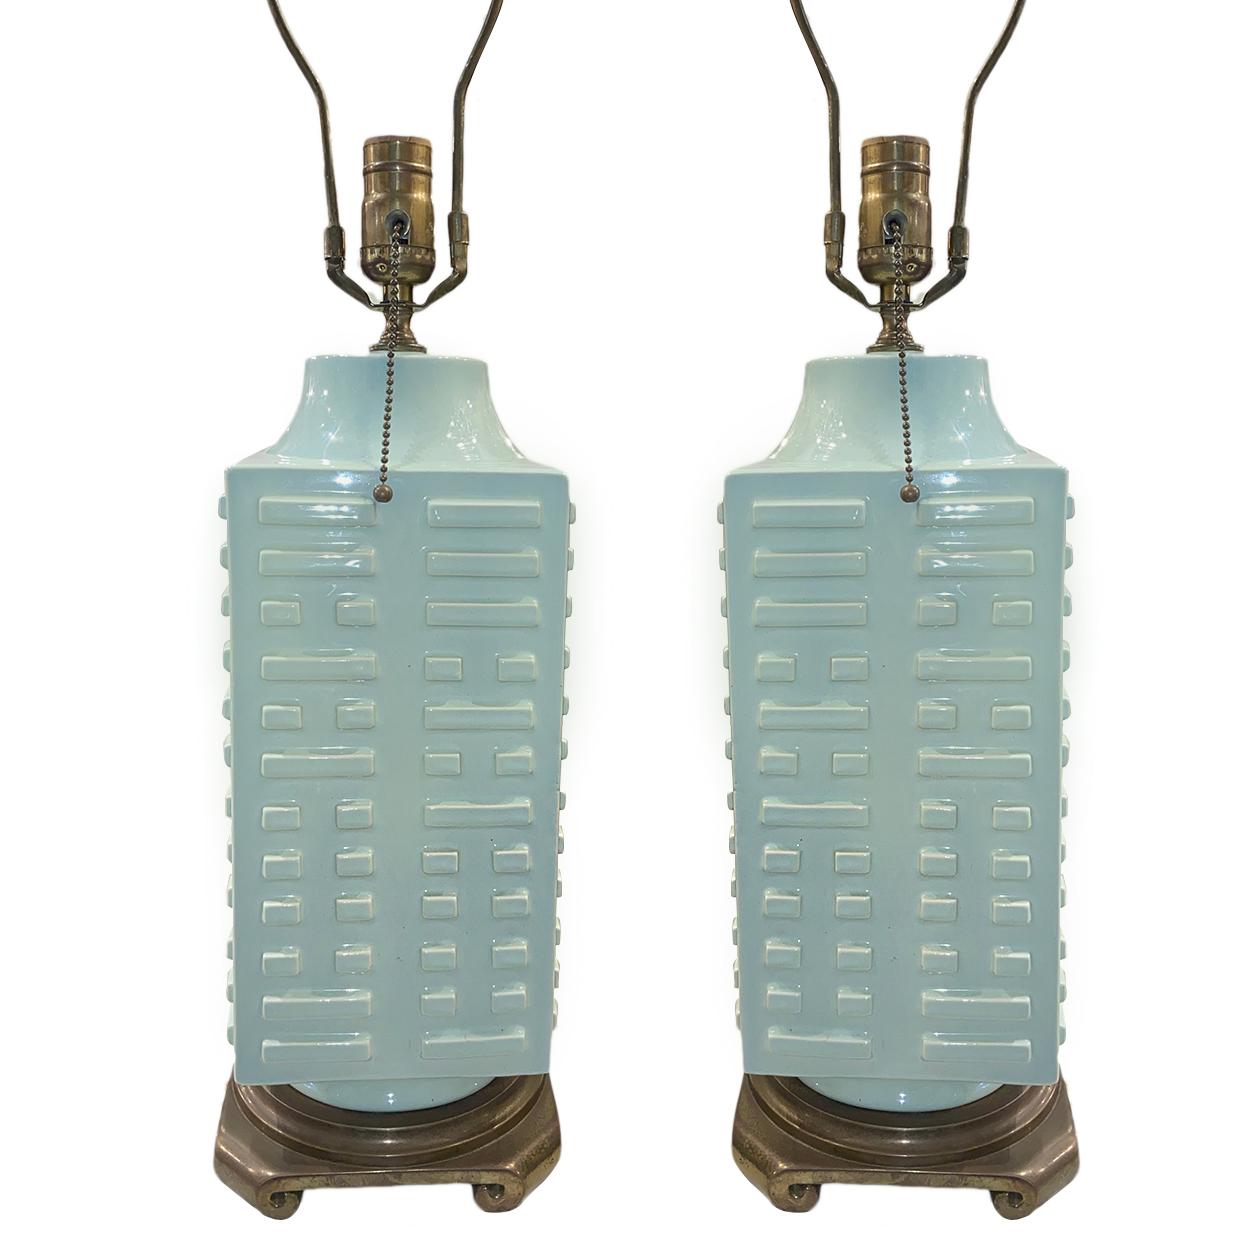 A pair of circa 1940s French celadon porcelain table lamps with bronze bases with geometric decoration on body.

Measurements:
Height of body 17?
Height to shade rest 26.5?